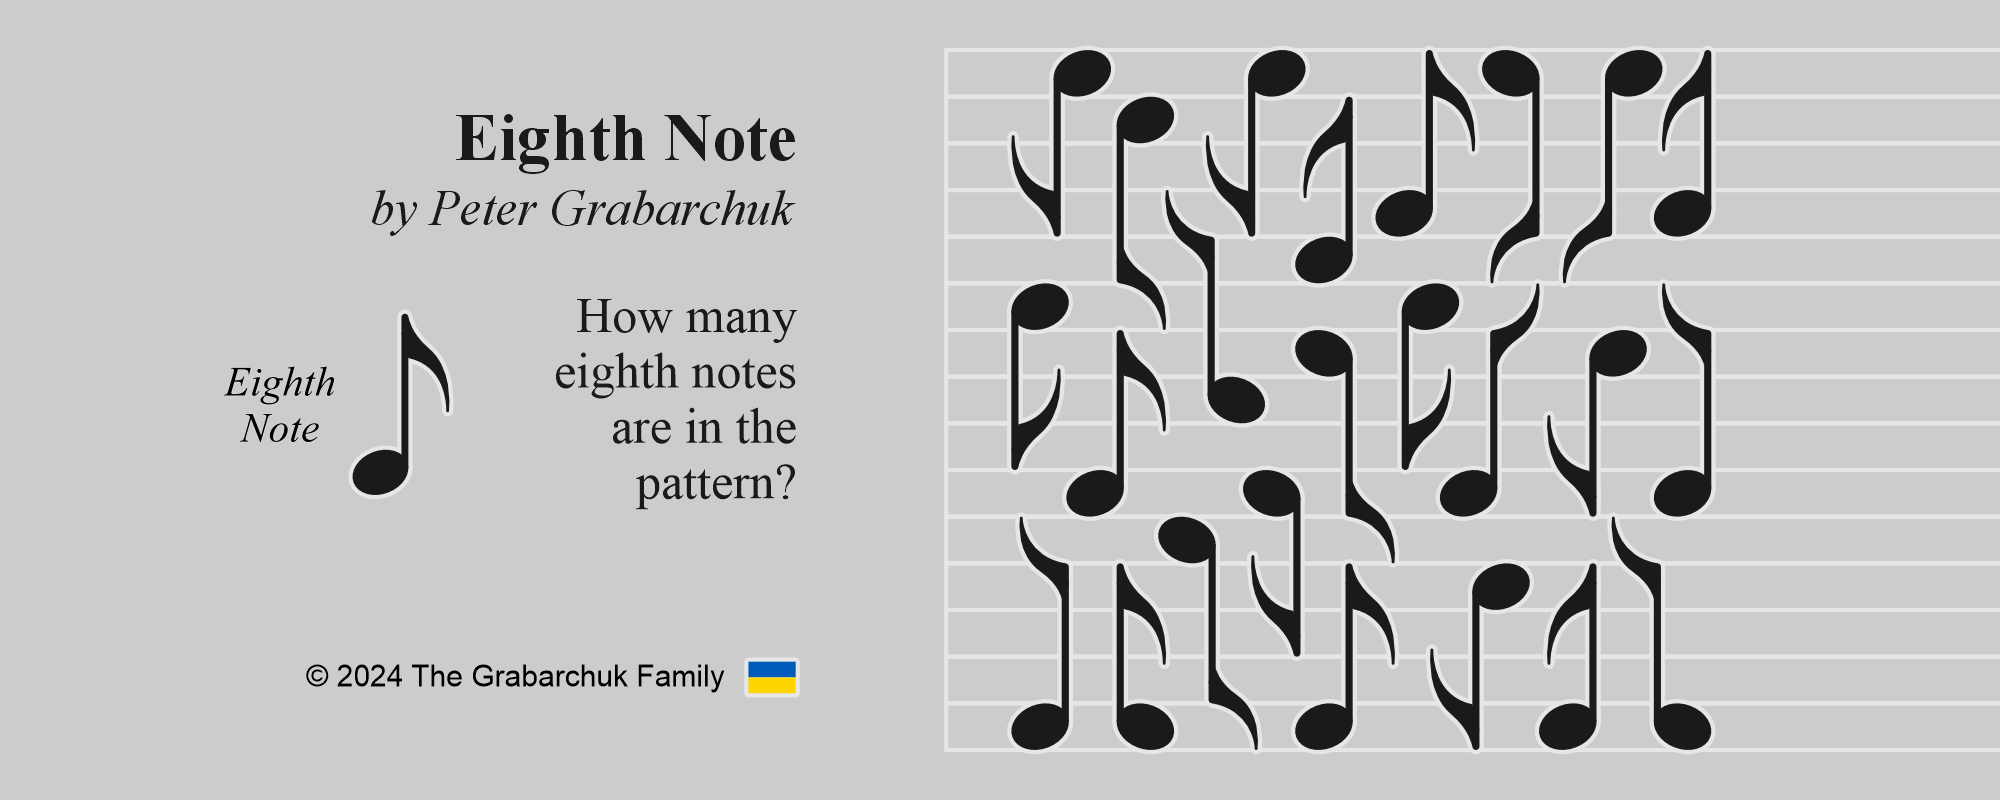 Eighth Note by Peter Grabarchuk